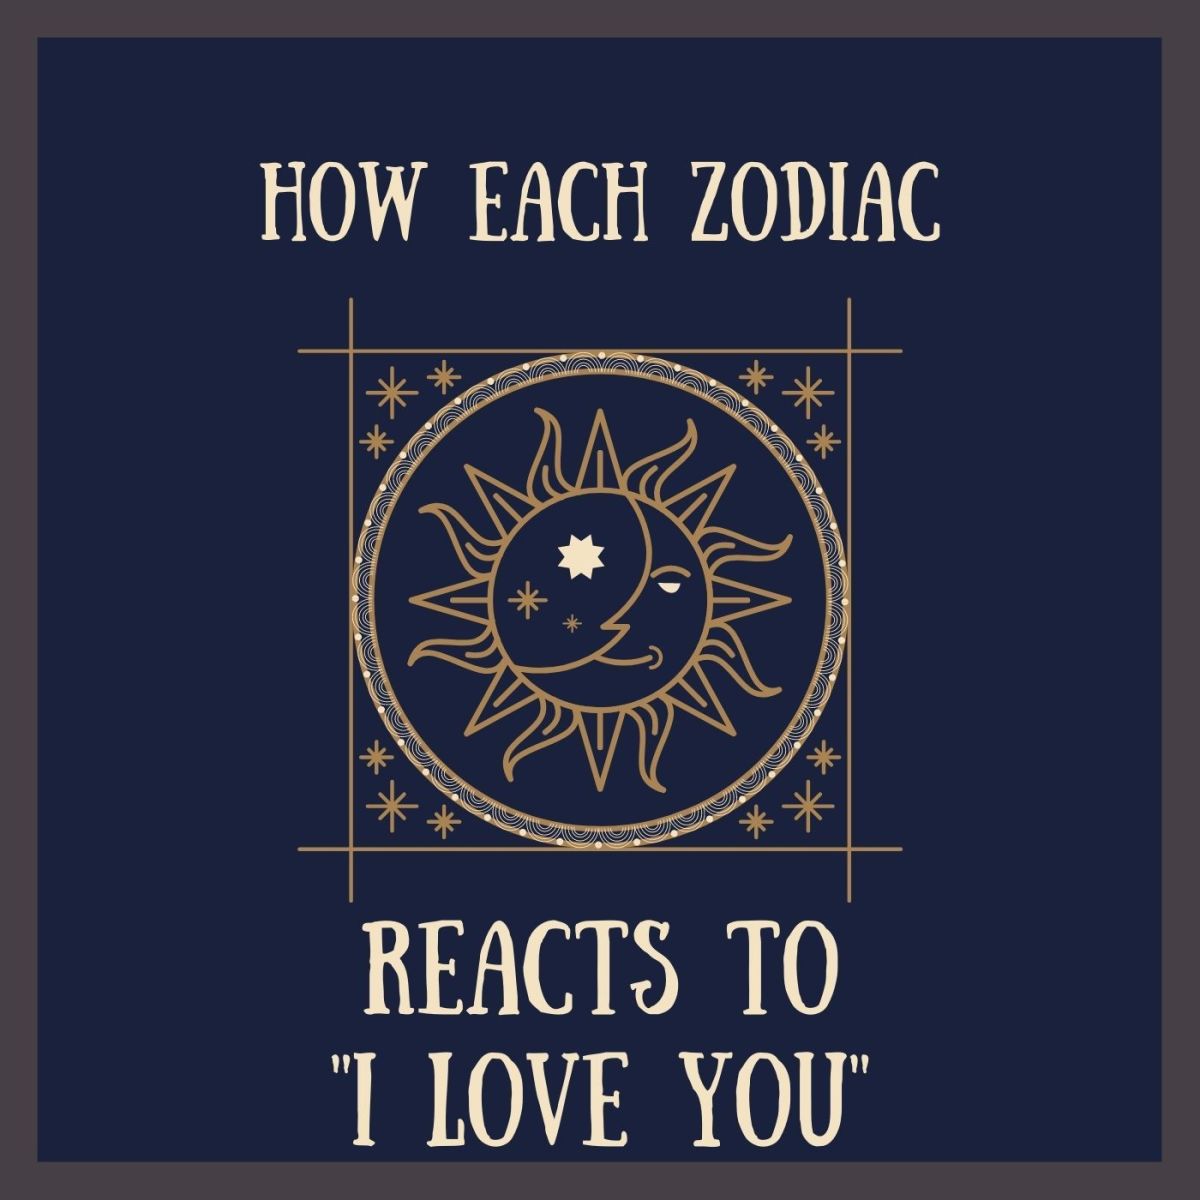 What to Expect After Saying 'I Love You' to All 12 Zodiac Signs?